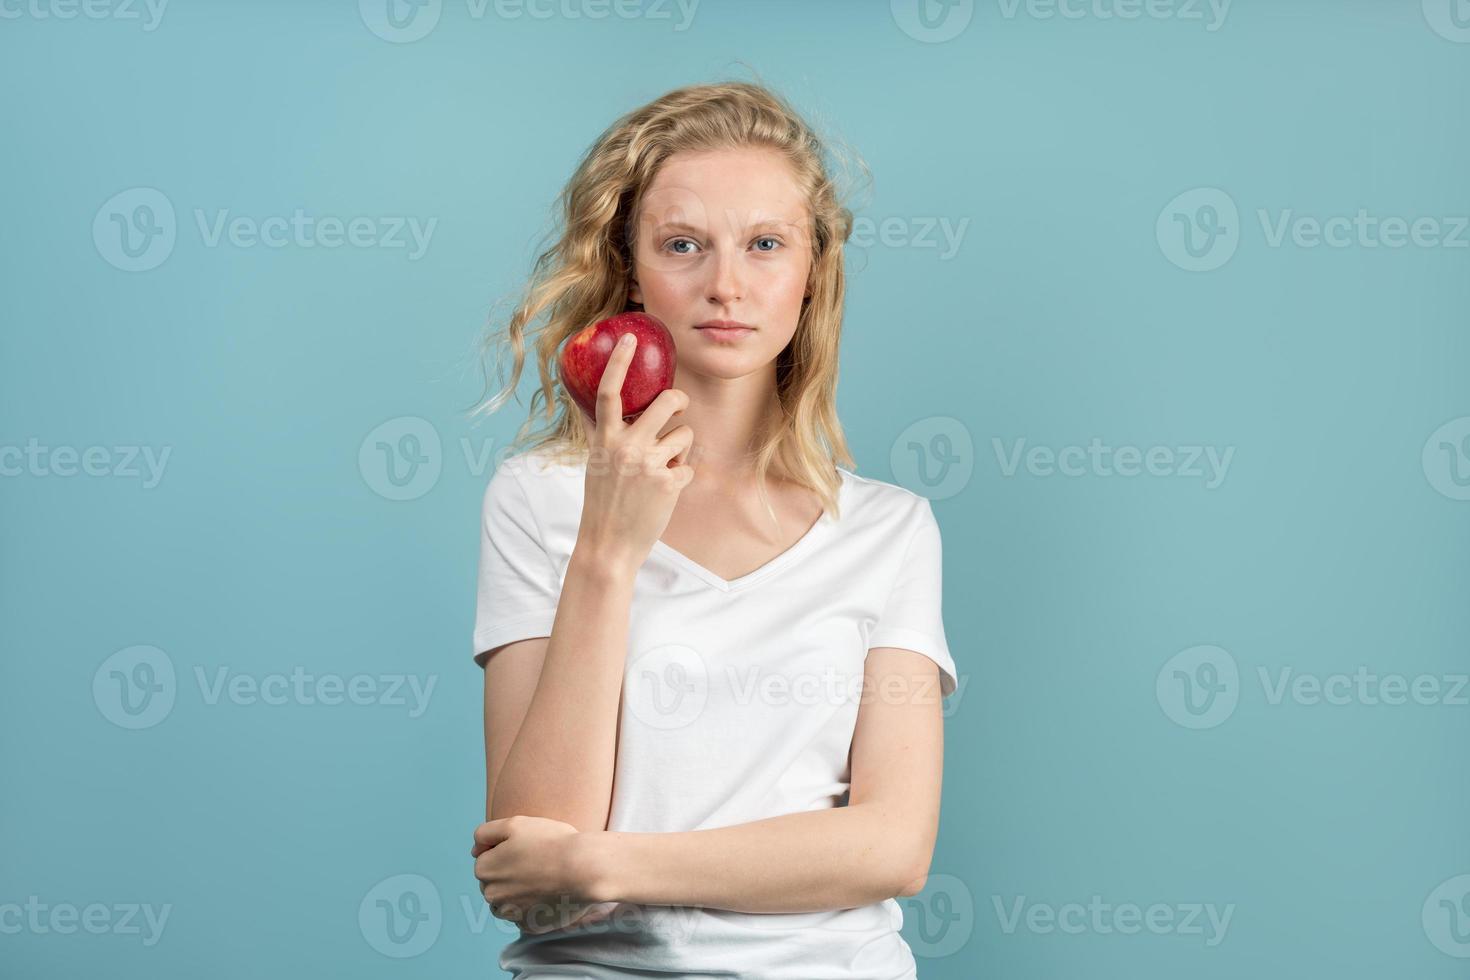 Beautiful young woman with clean young fresh skin without makeup with long curly hair holding apple photo